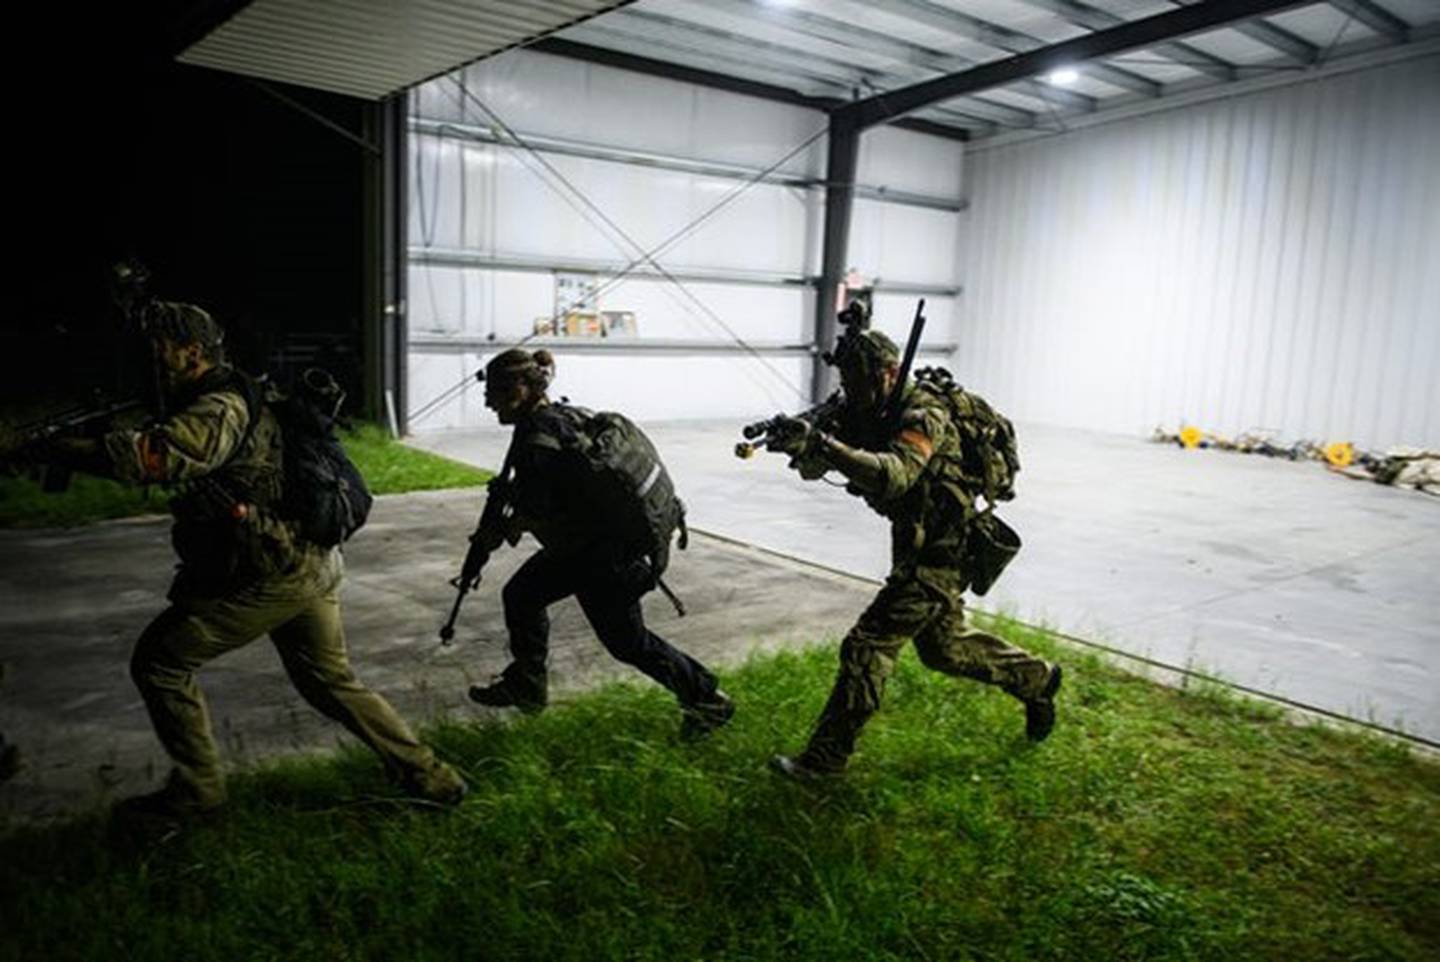 Special Forces candidates hit their final "combat target" at Curtis L. Brown, Jr. Field Airport in Elizabethtown, Tuesday, Sept. 29, 2023, during the final phase of field training known as Robin Sage.